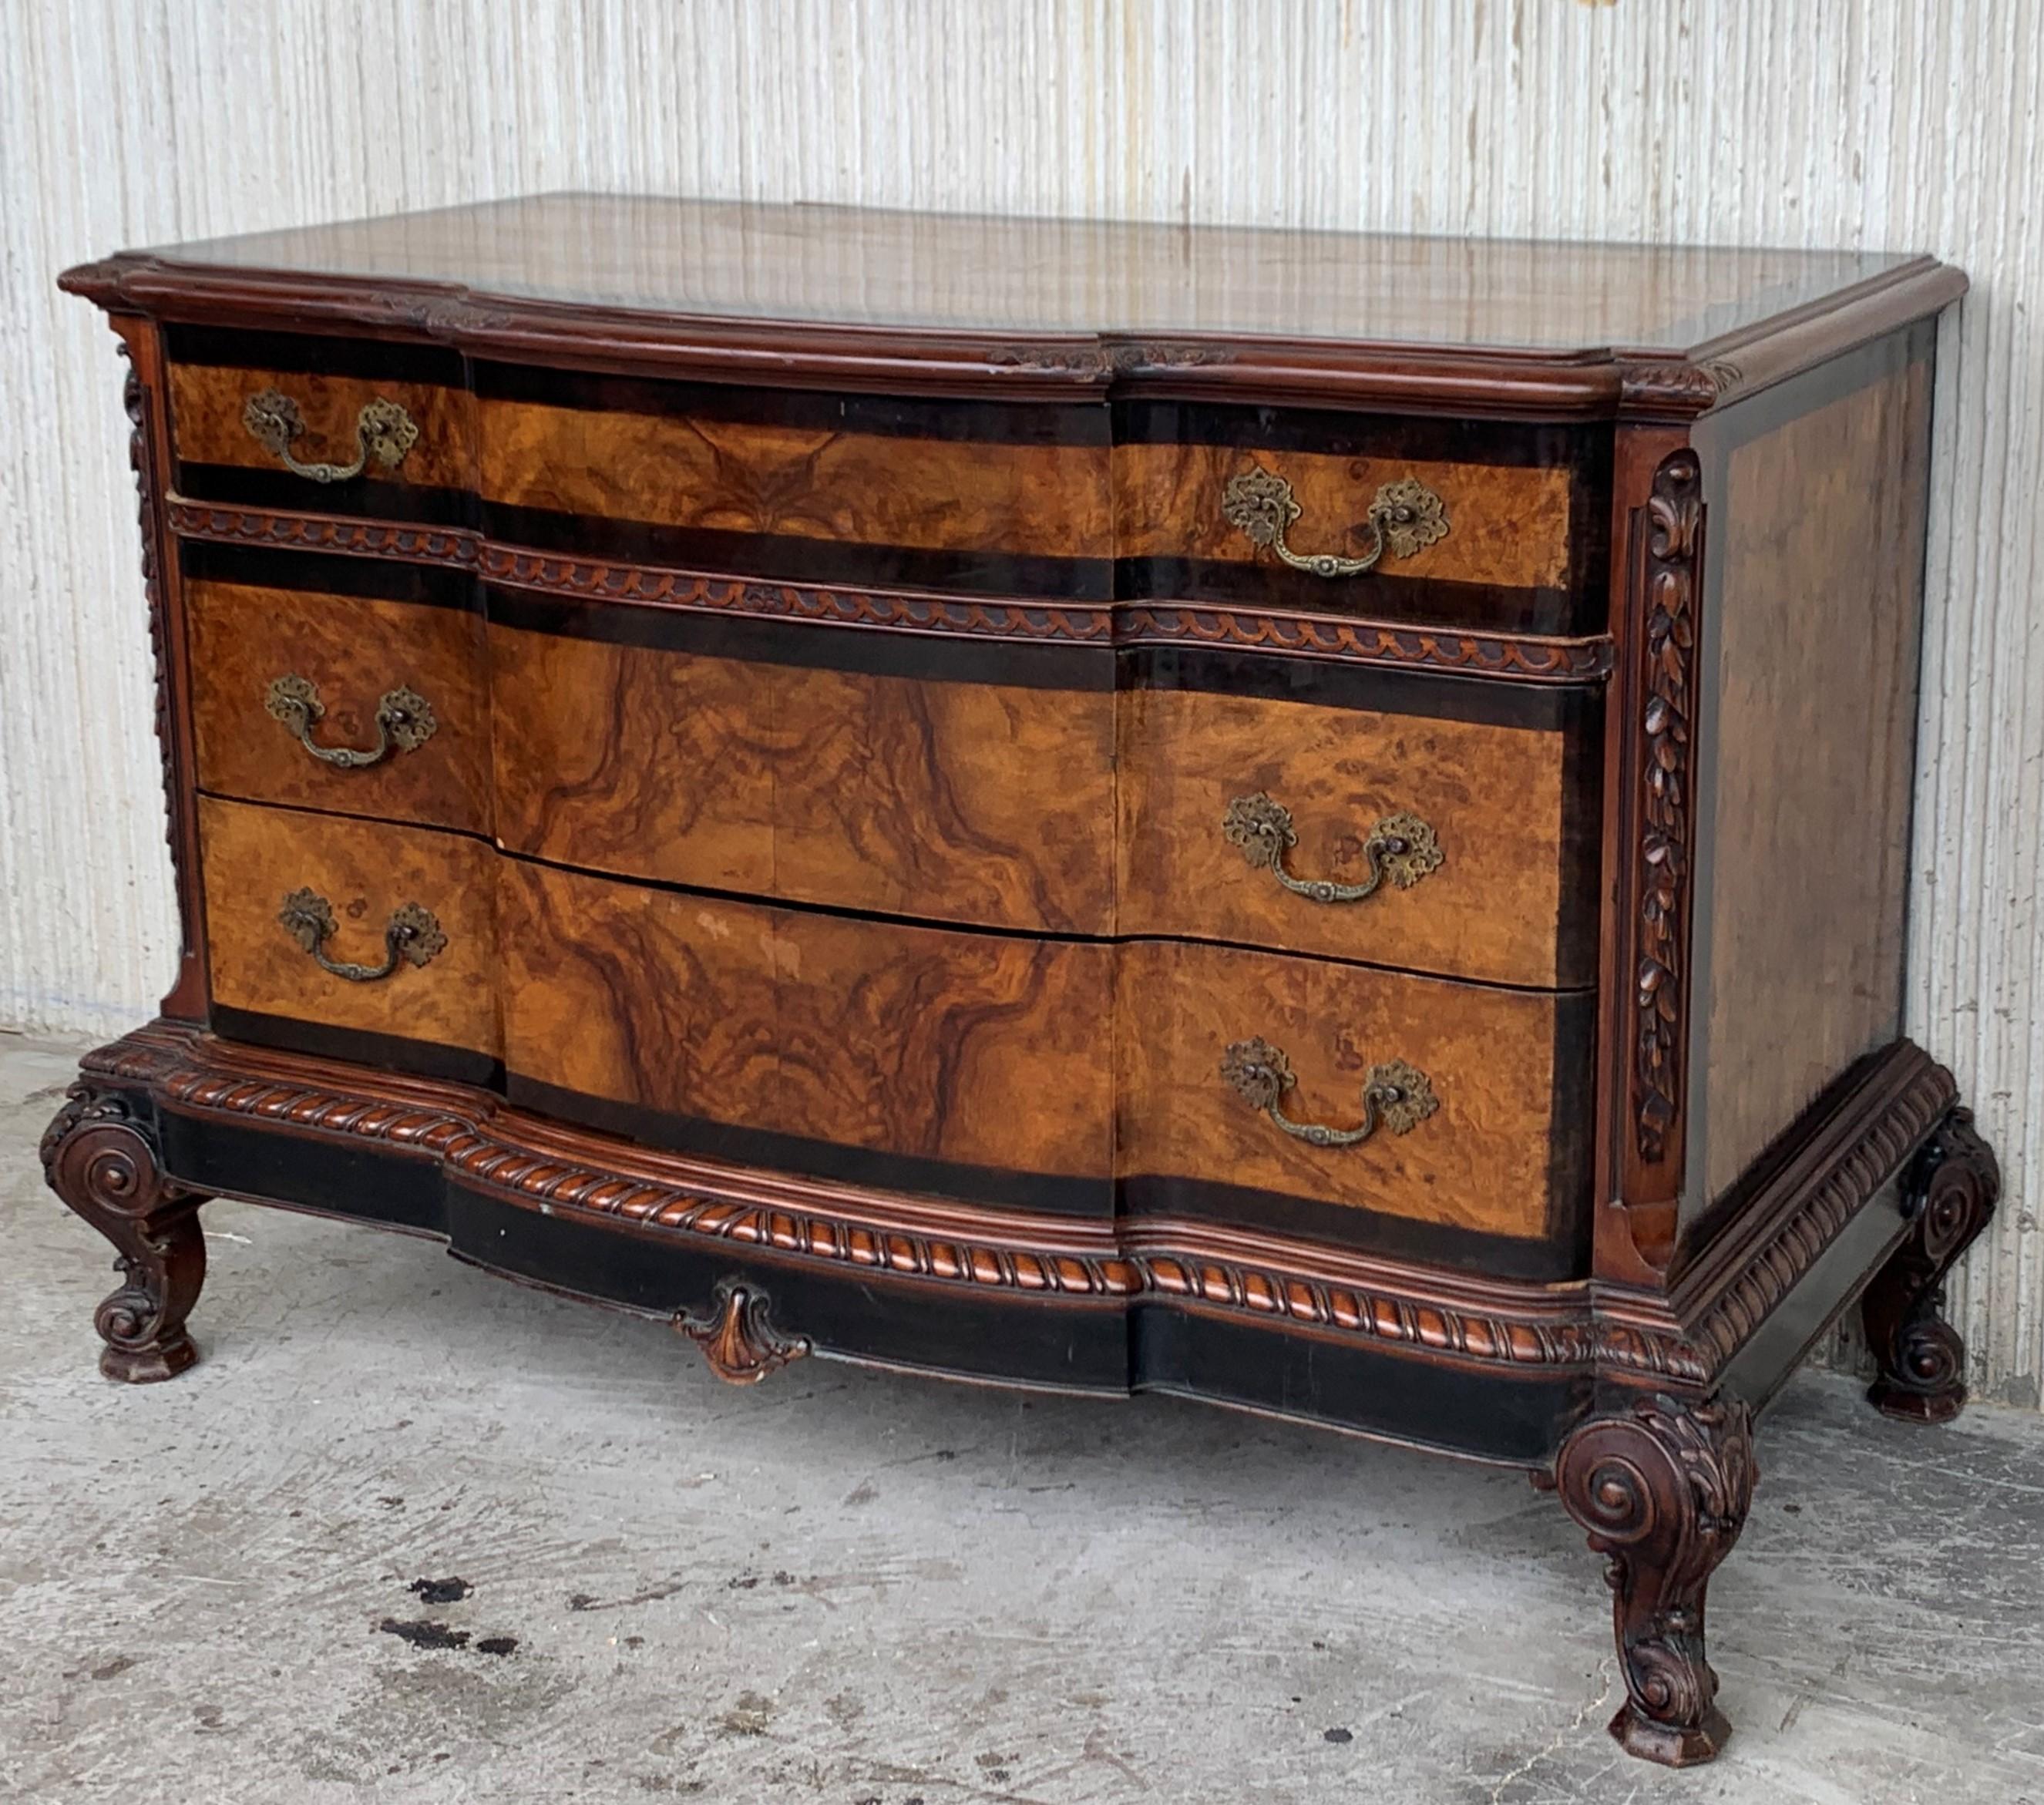 1900s Venetian Baroque Dresser with mirror in Burl Walnut with Ebonized Details In Good Condition For Sale In Miami, FL